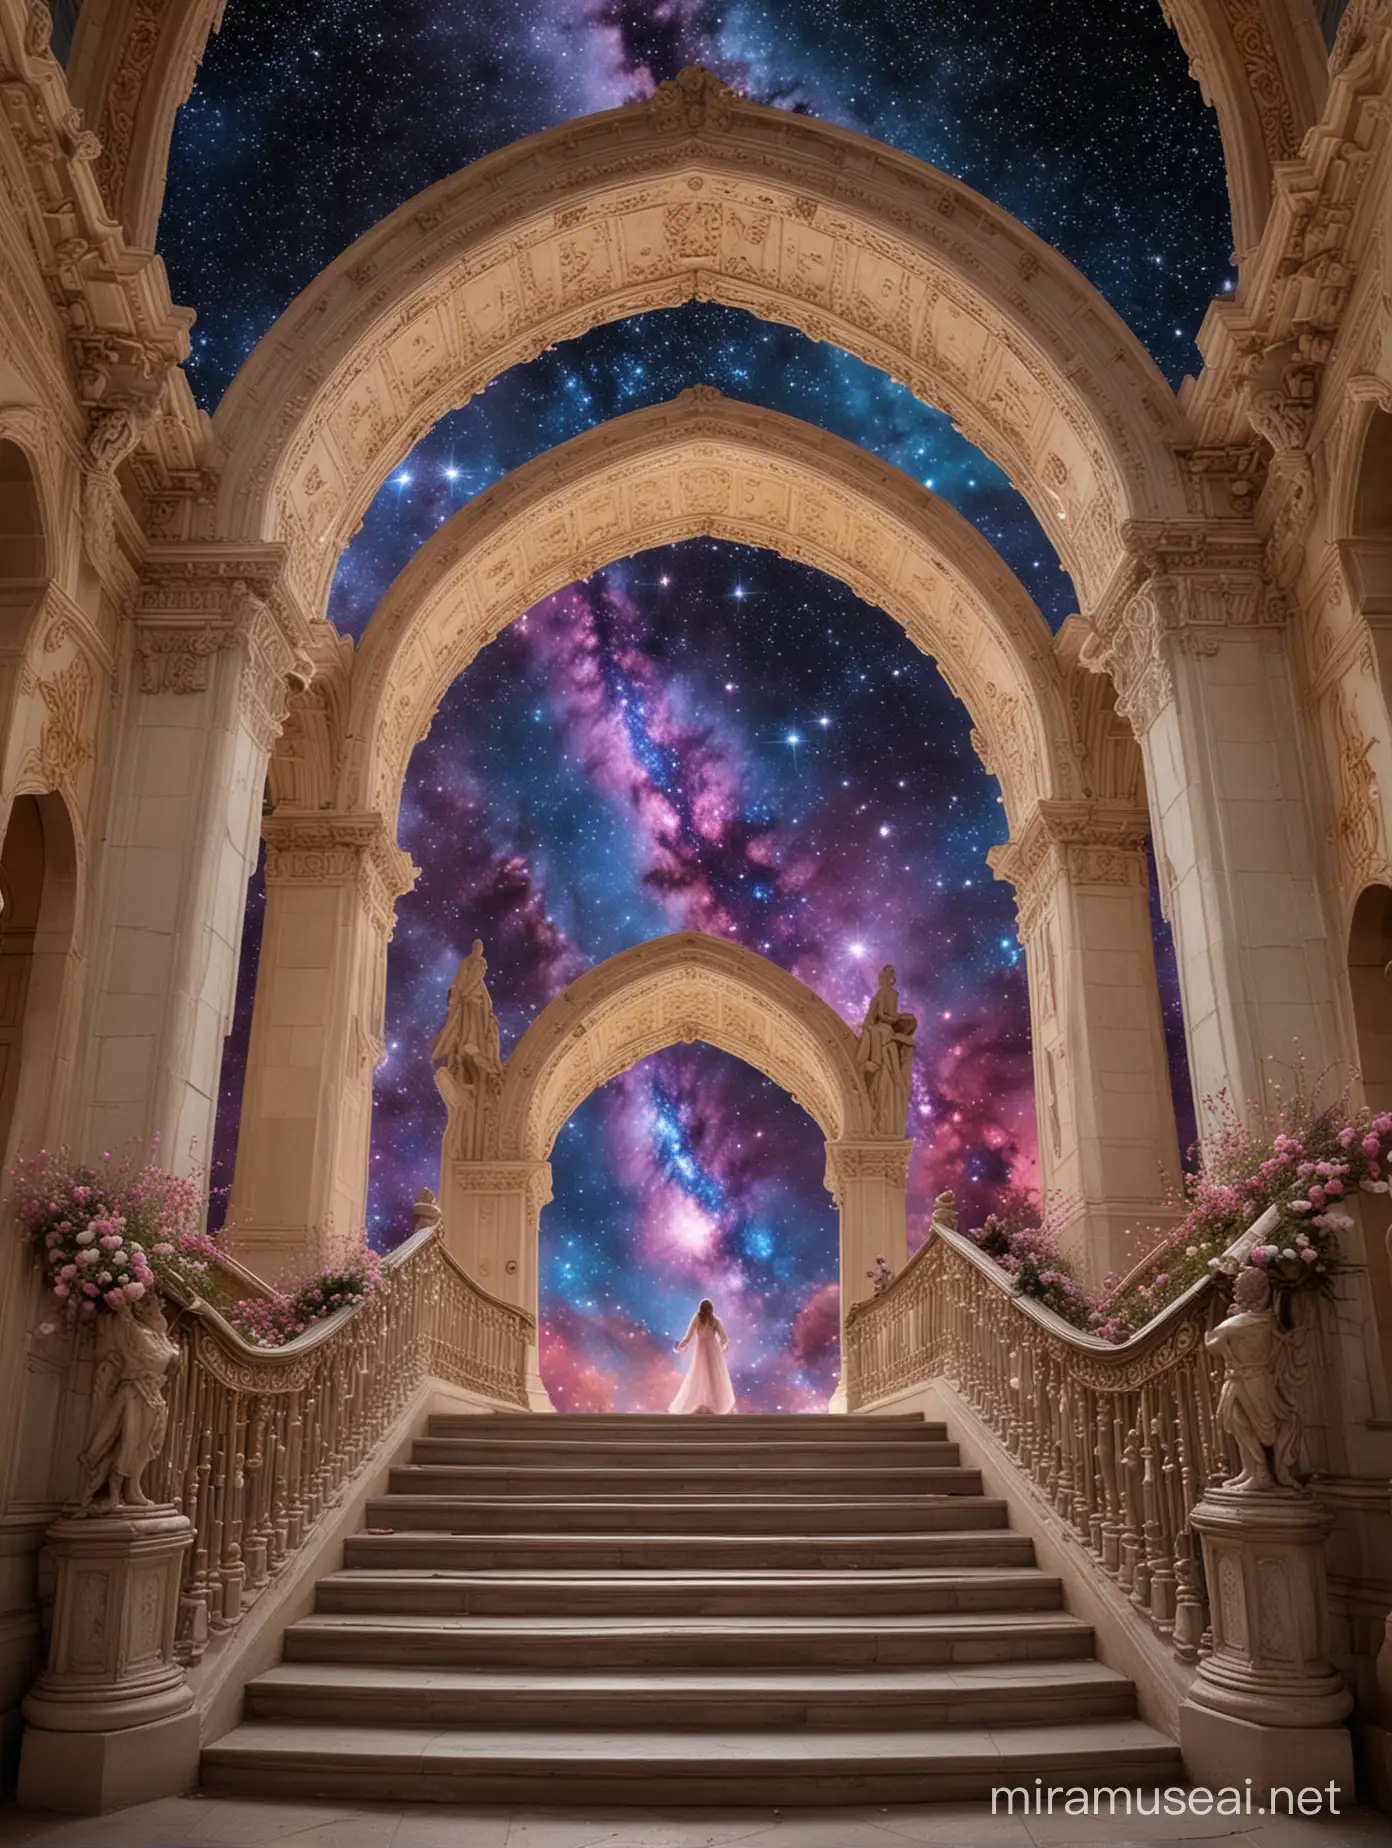 Celestial Staircase Gateway to Transcendence and Magic